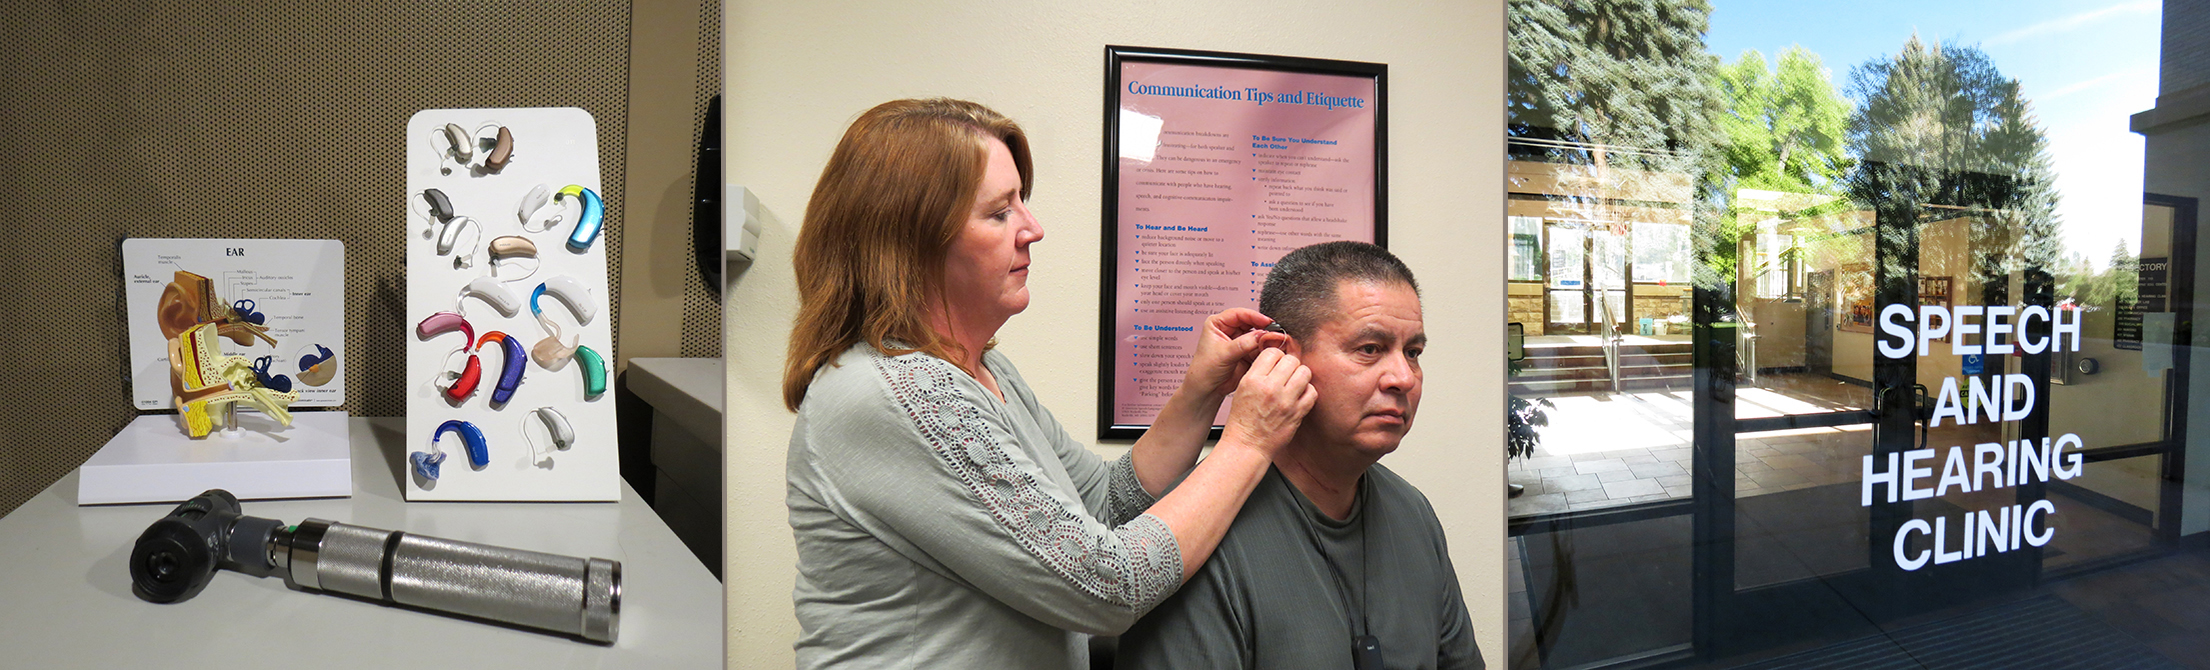 Photo showing activities in a hearing clinic. 